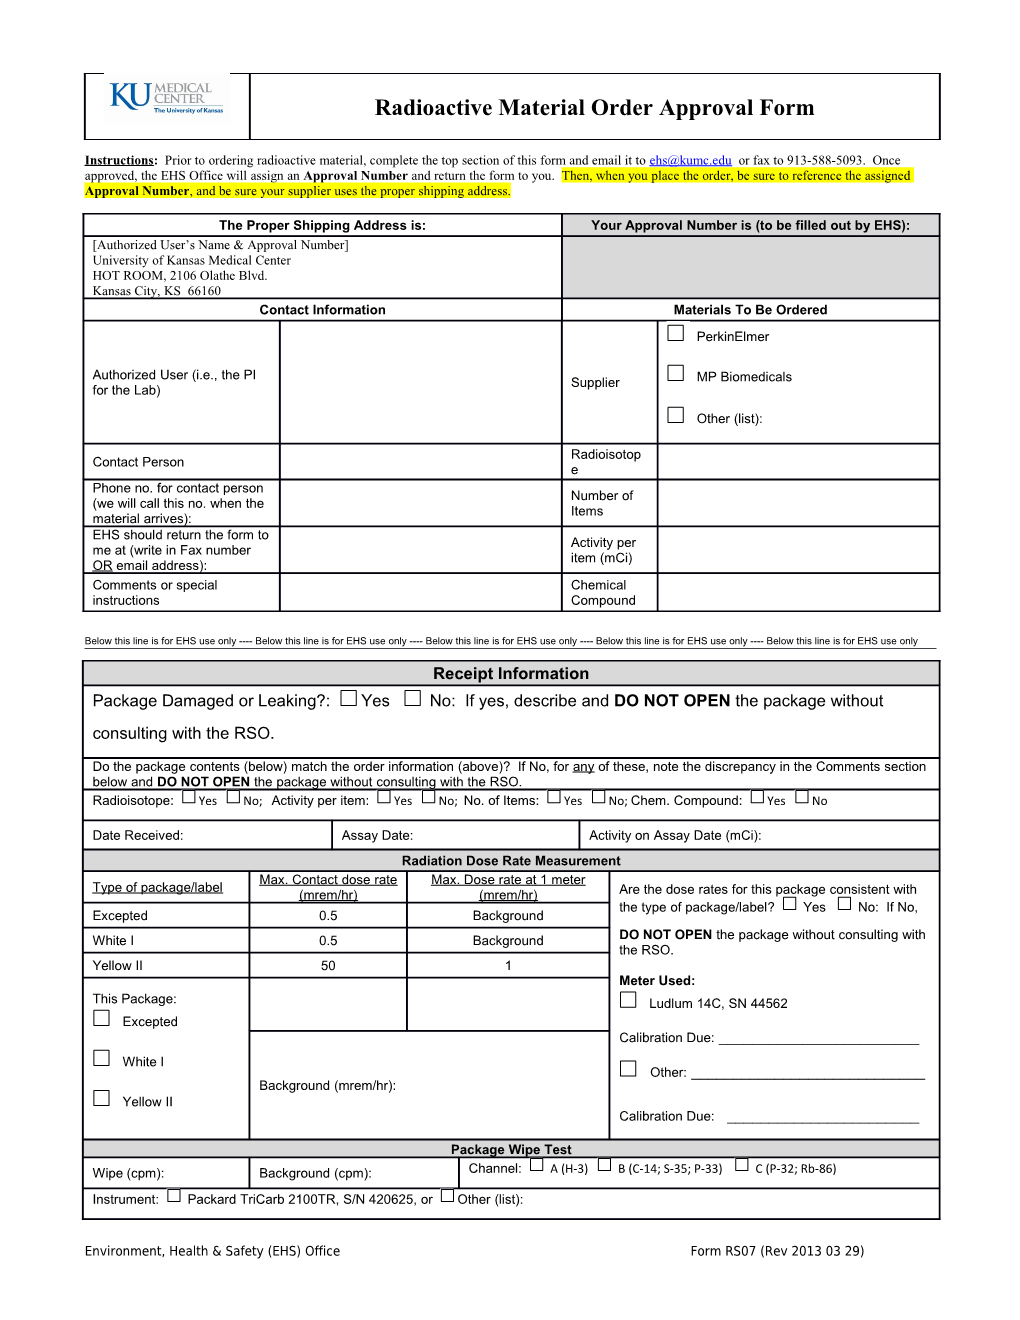 Radioactive Material Order Approval Form